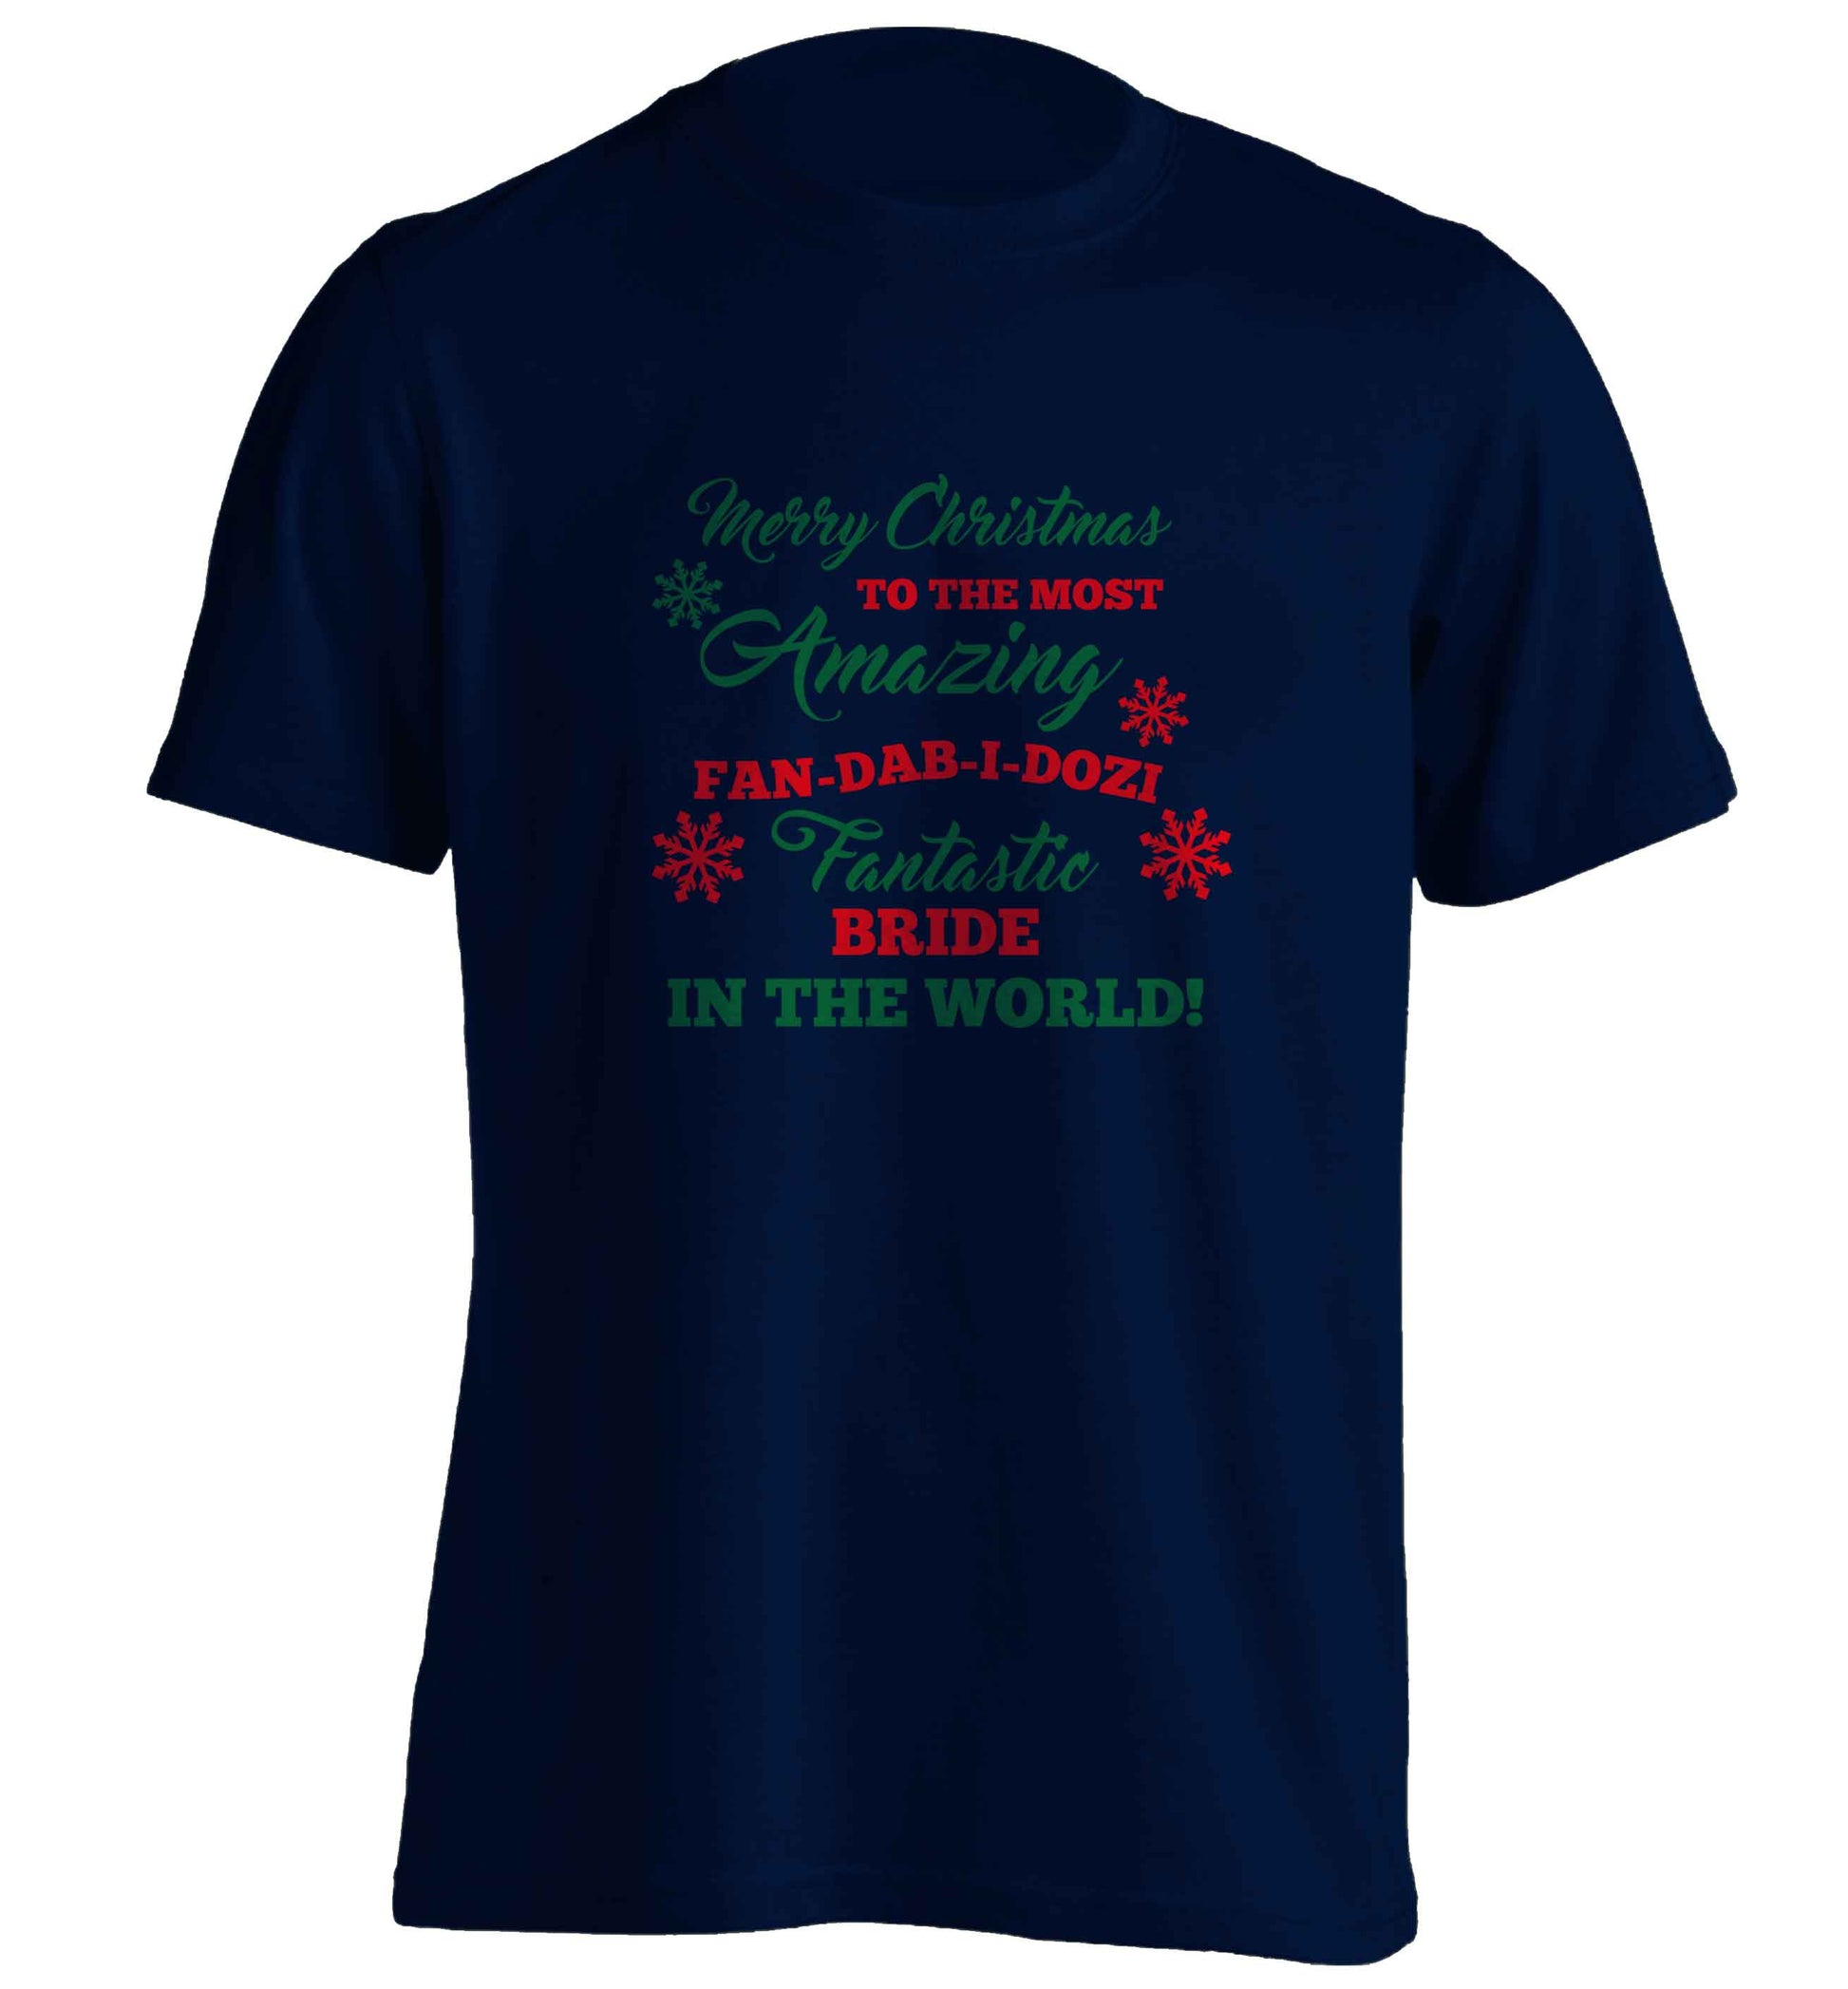 Merry Christmas to the most amazing bride in the world! adults unisex navy Tshirt 2XL